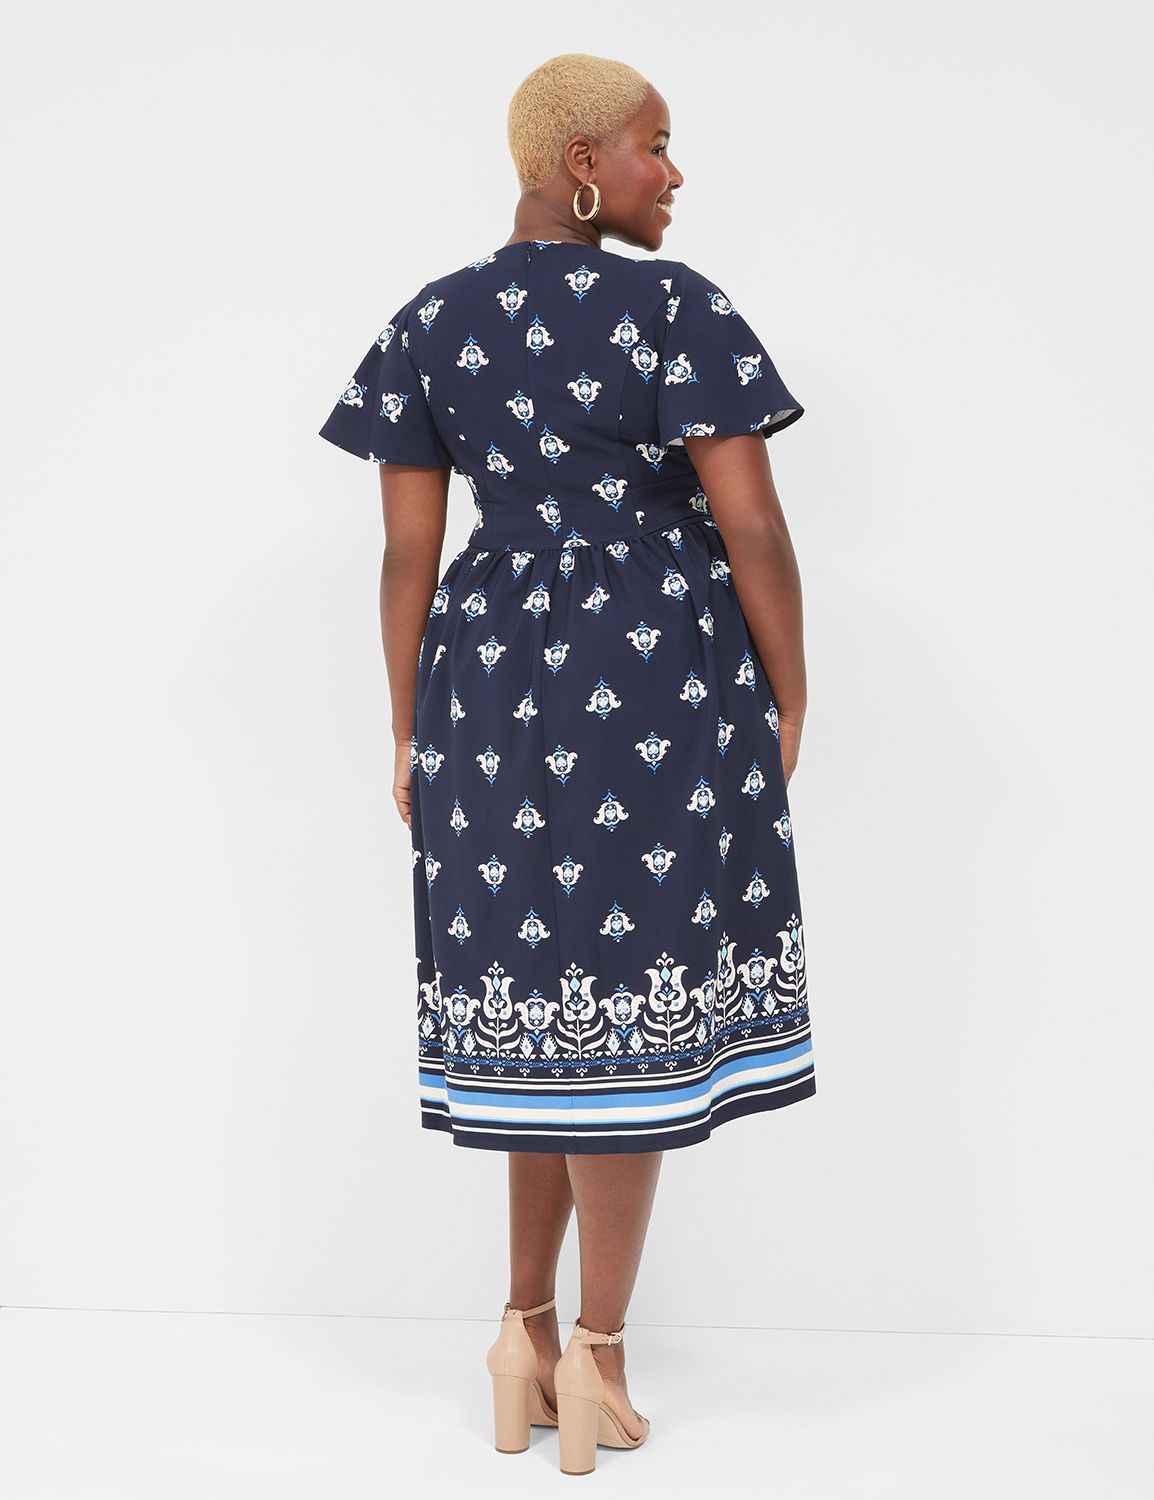 The Lena Dress By Lane Bryant in Violet